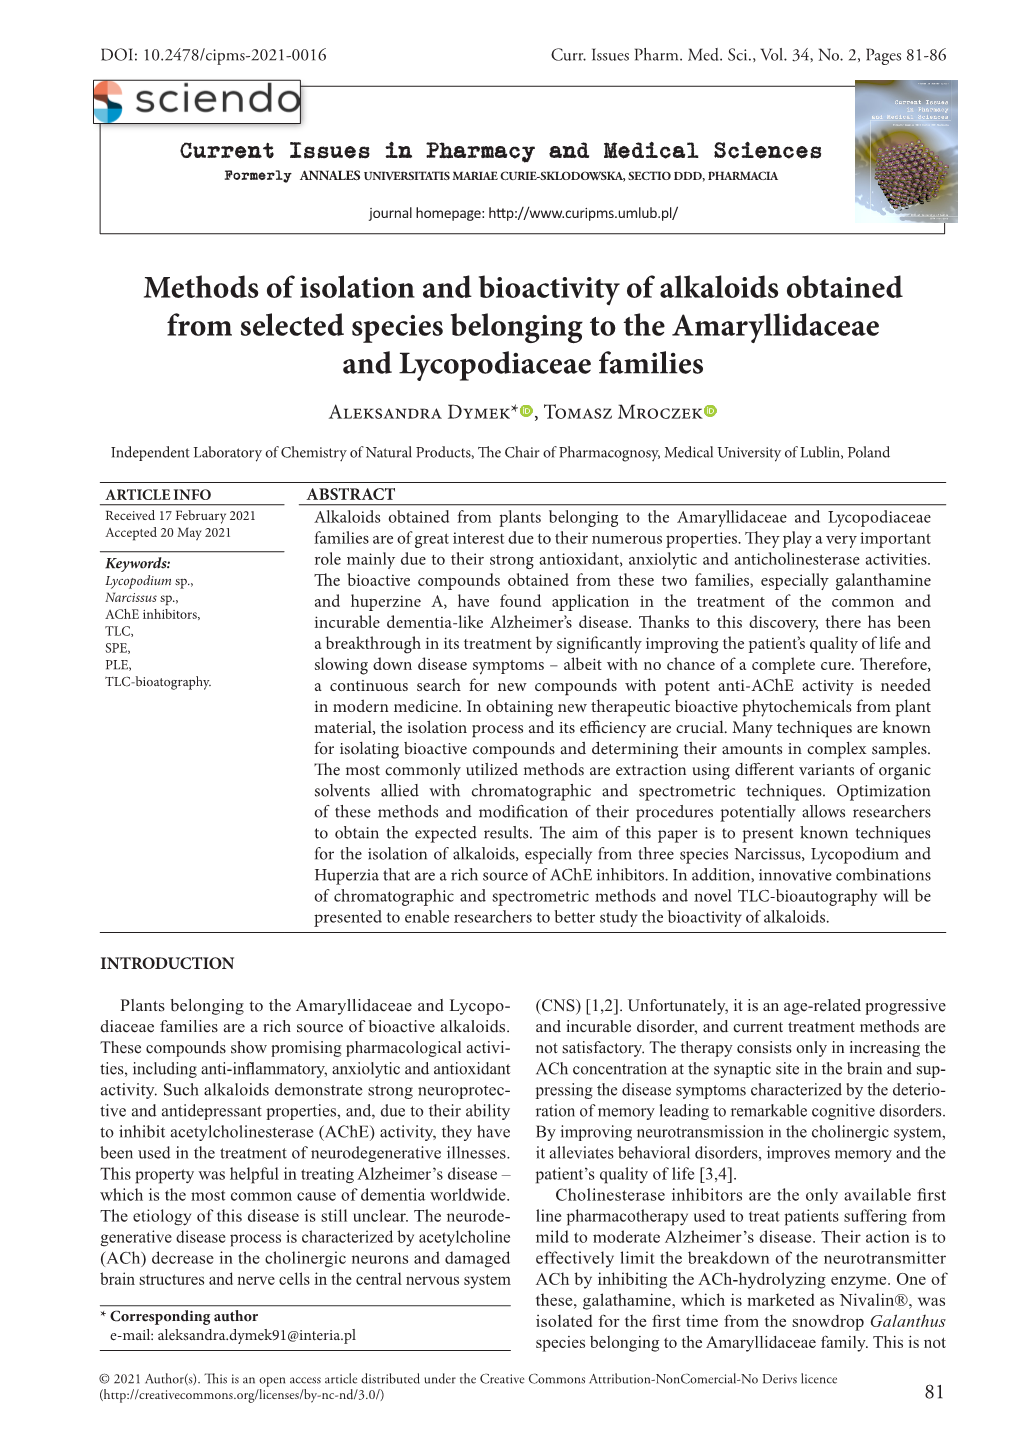 Methods of Isolation and Bioactivity of Alkaloids Obtained from Selected